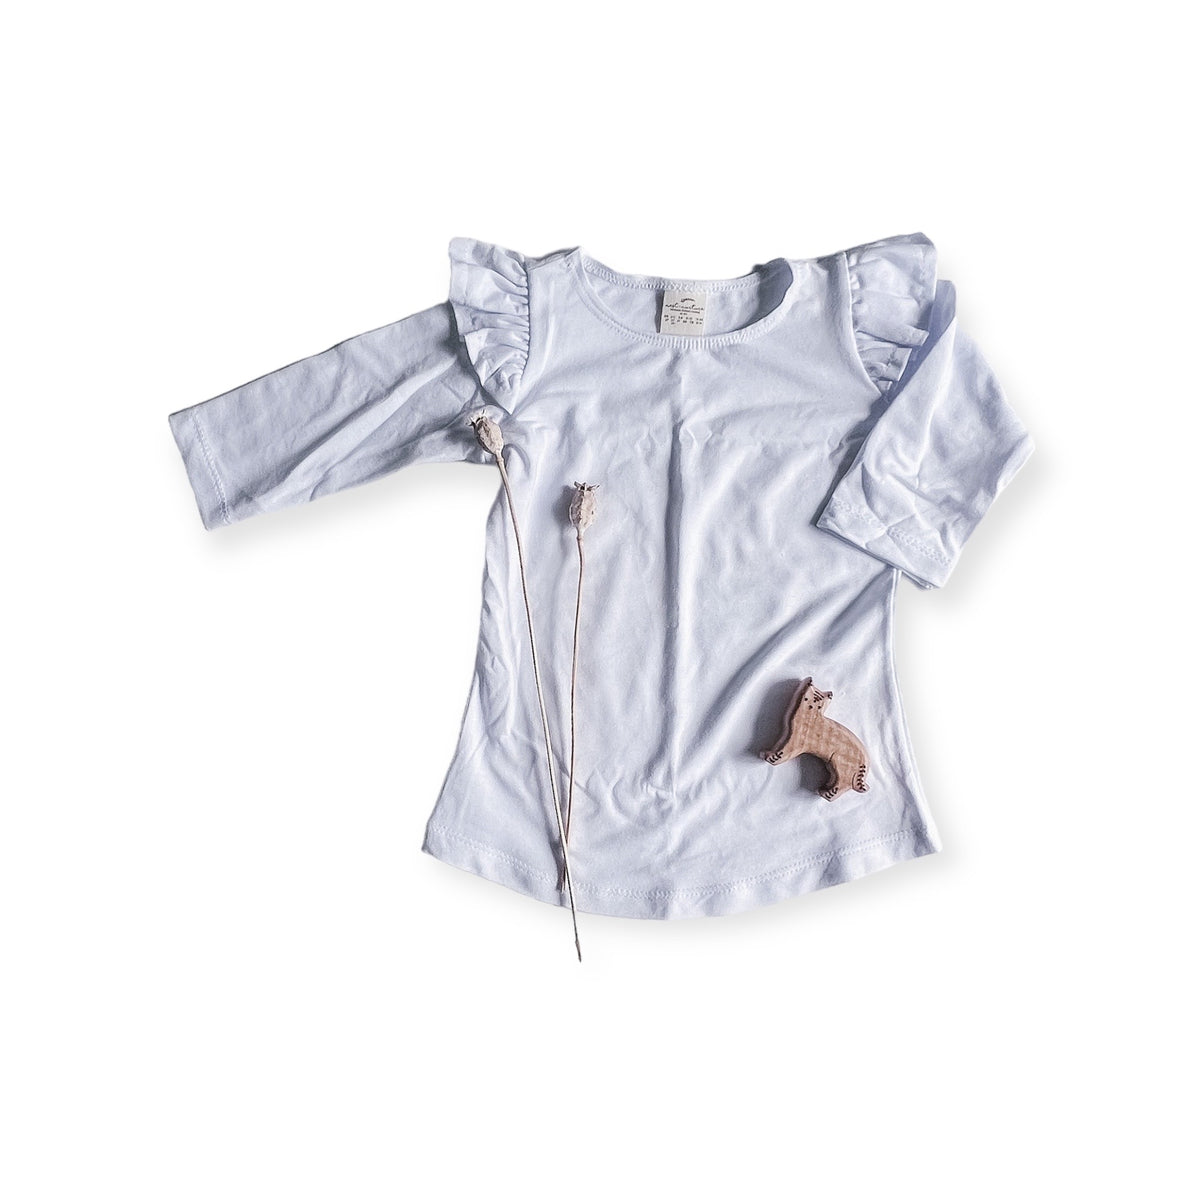 Millie Flutter Shirt in 'Cloud' - Ready To Ship